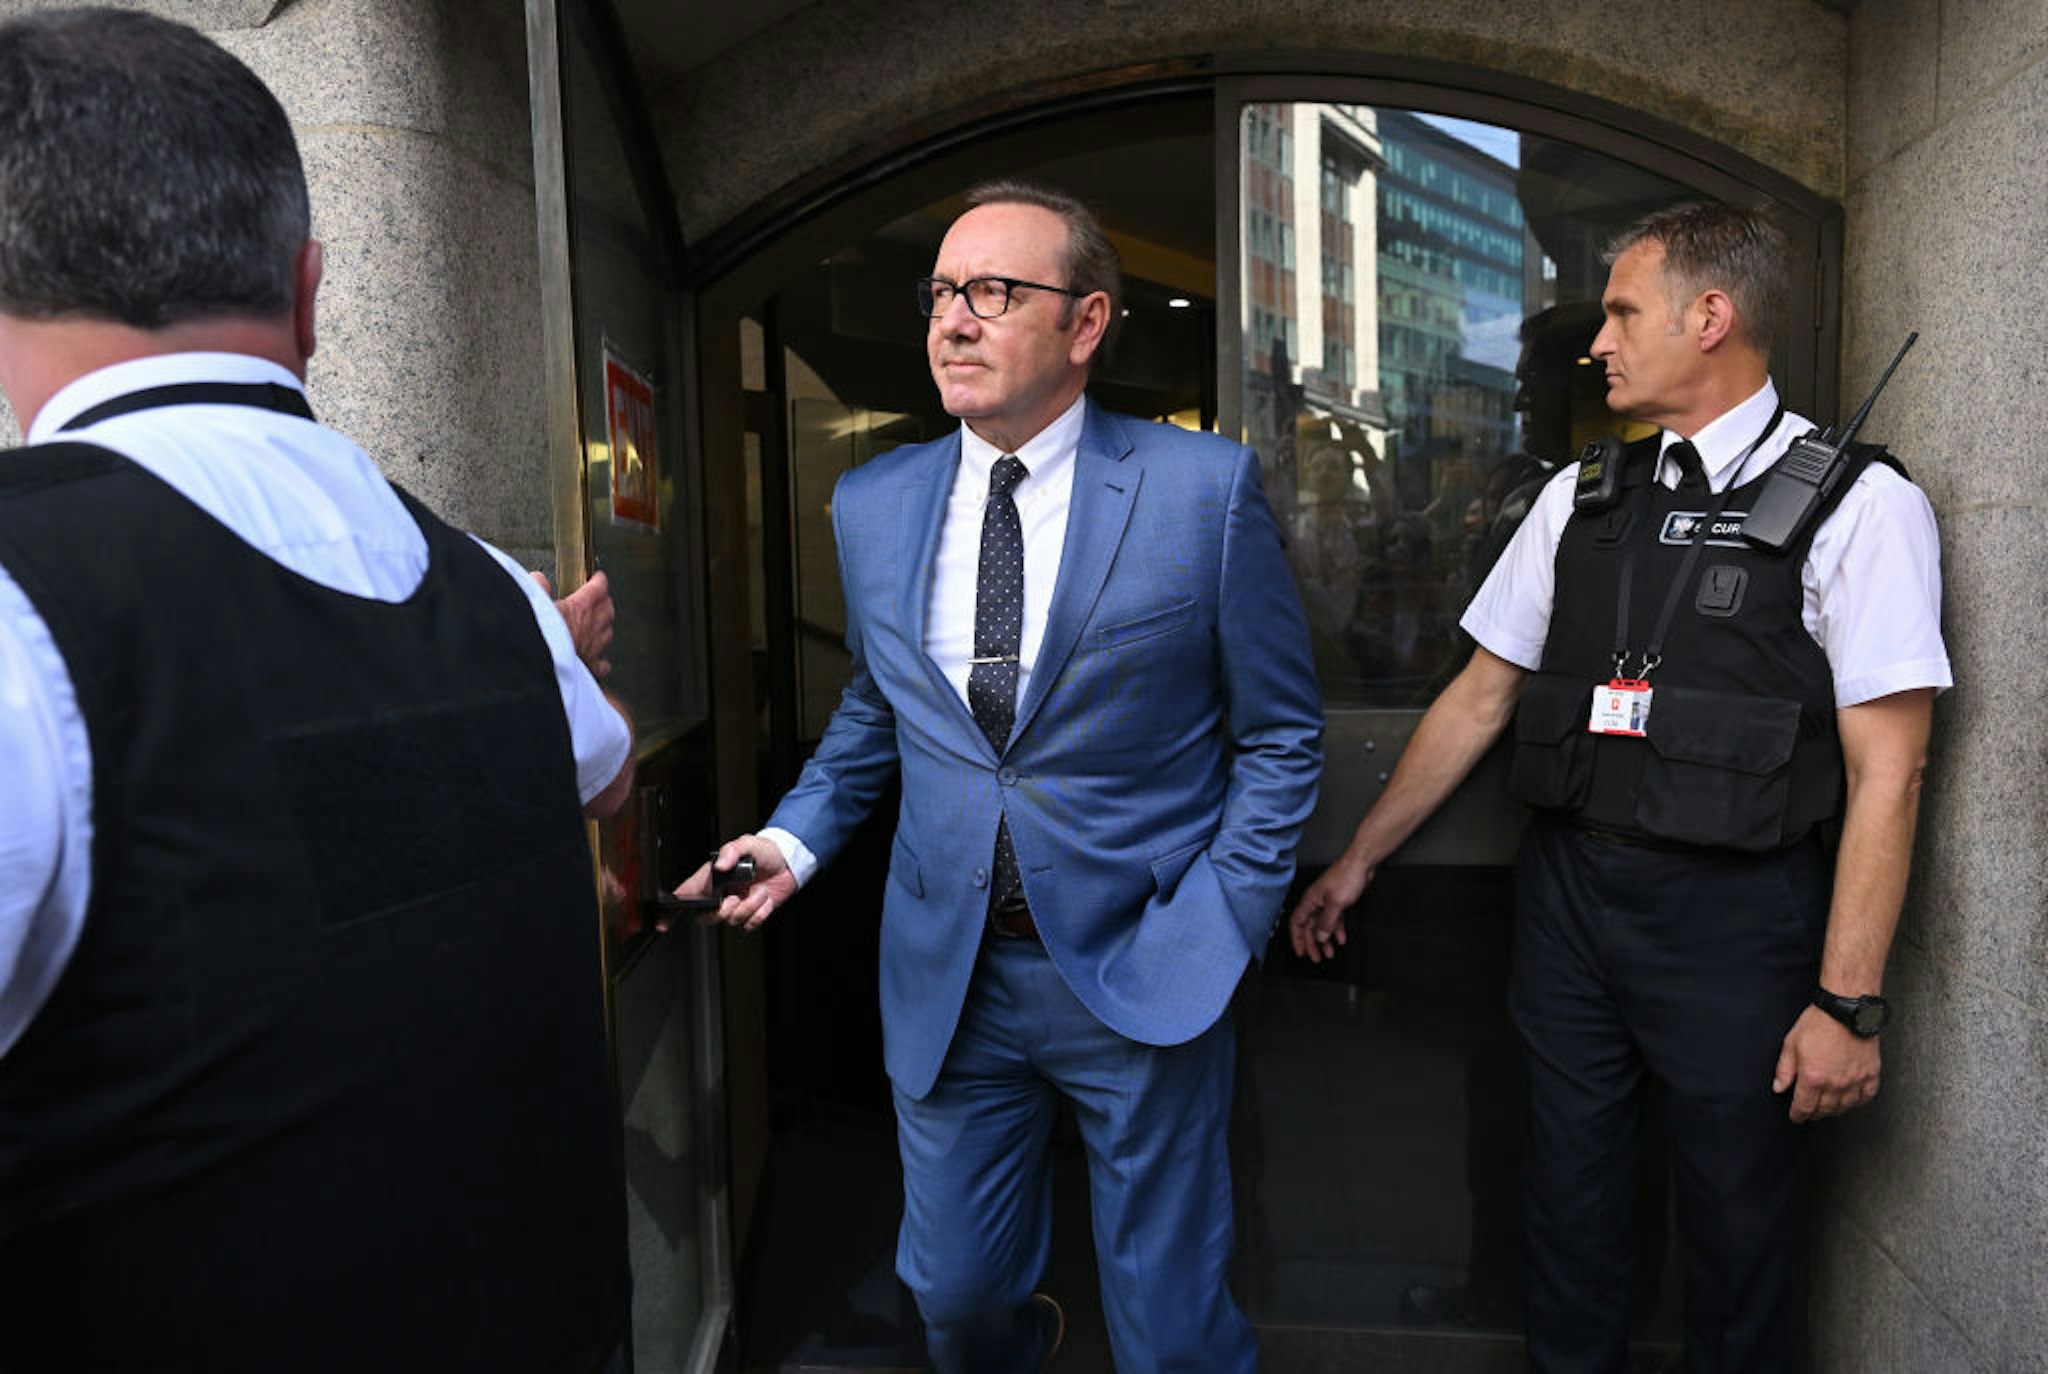 LONDON, ENGLAND - JULY 14: Actor Kevin Spacey leaves the Old Bailey Central Criminal Court on July 14, 2022 in London, England. The Hollywood actor faces four counts of sexual assault against three men and one count of causing a person to engage in penetrative sexual activity without consent. The charges follow a review of evidence gathered by the Metropolitan Police. (Photo by Karwai Tang/WireImage)